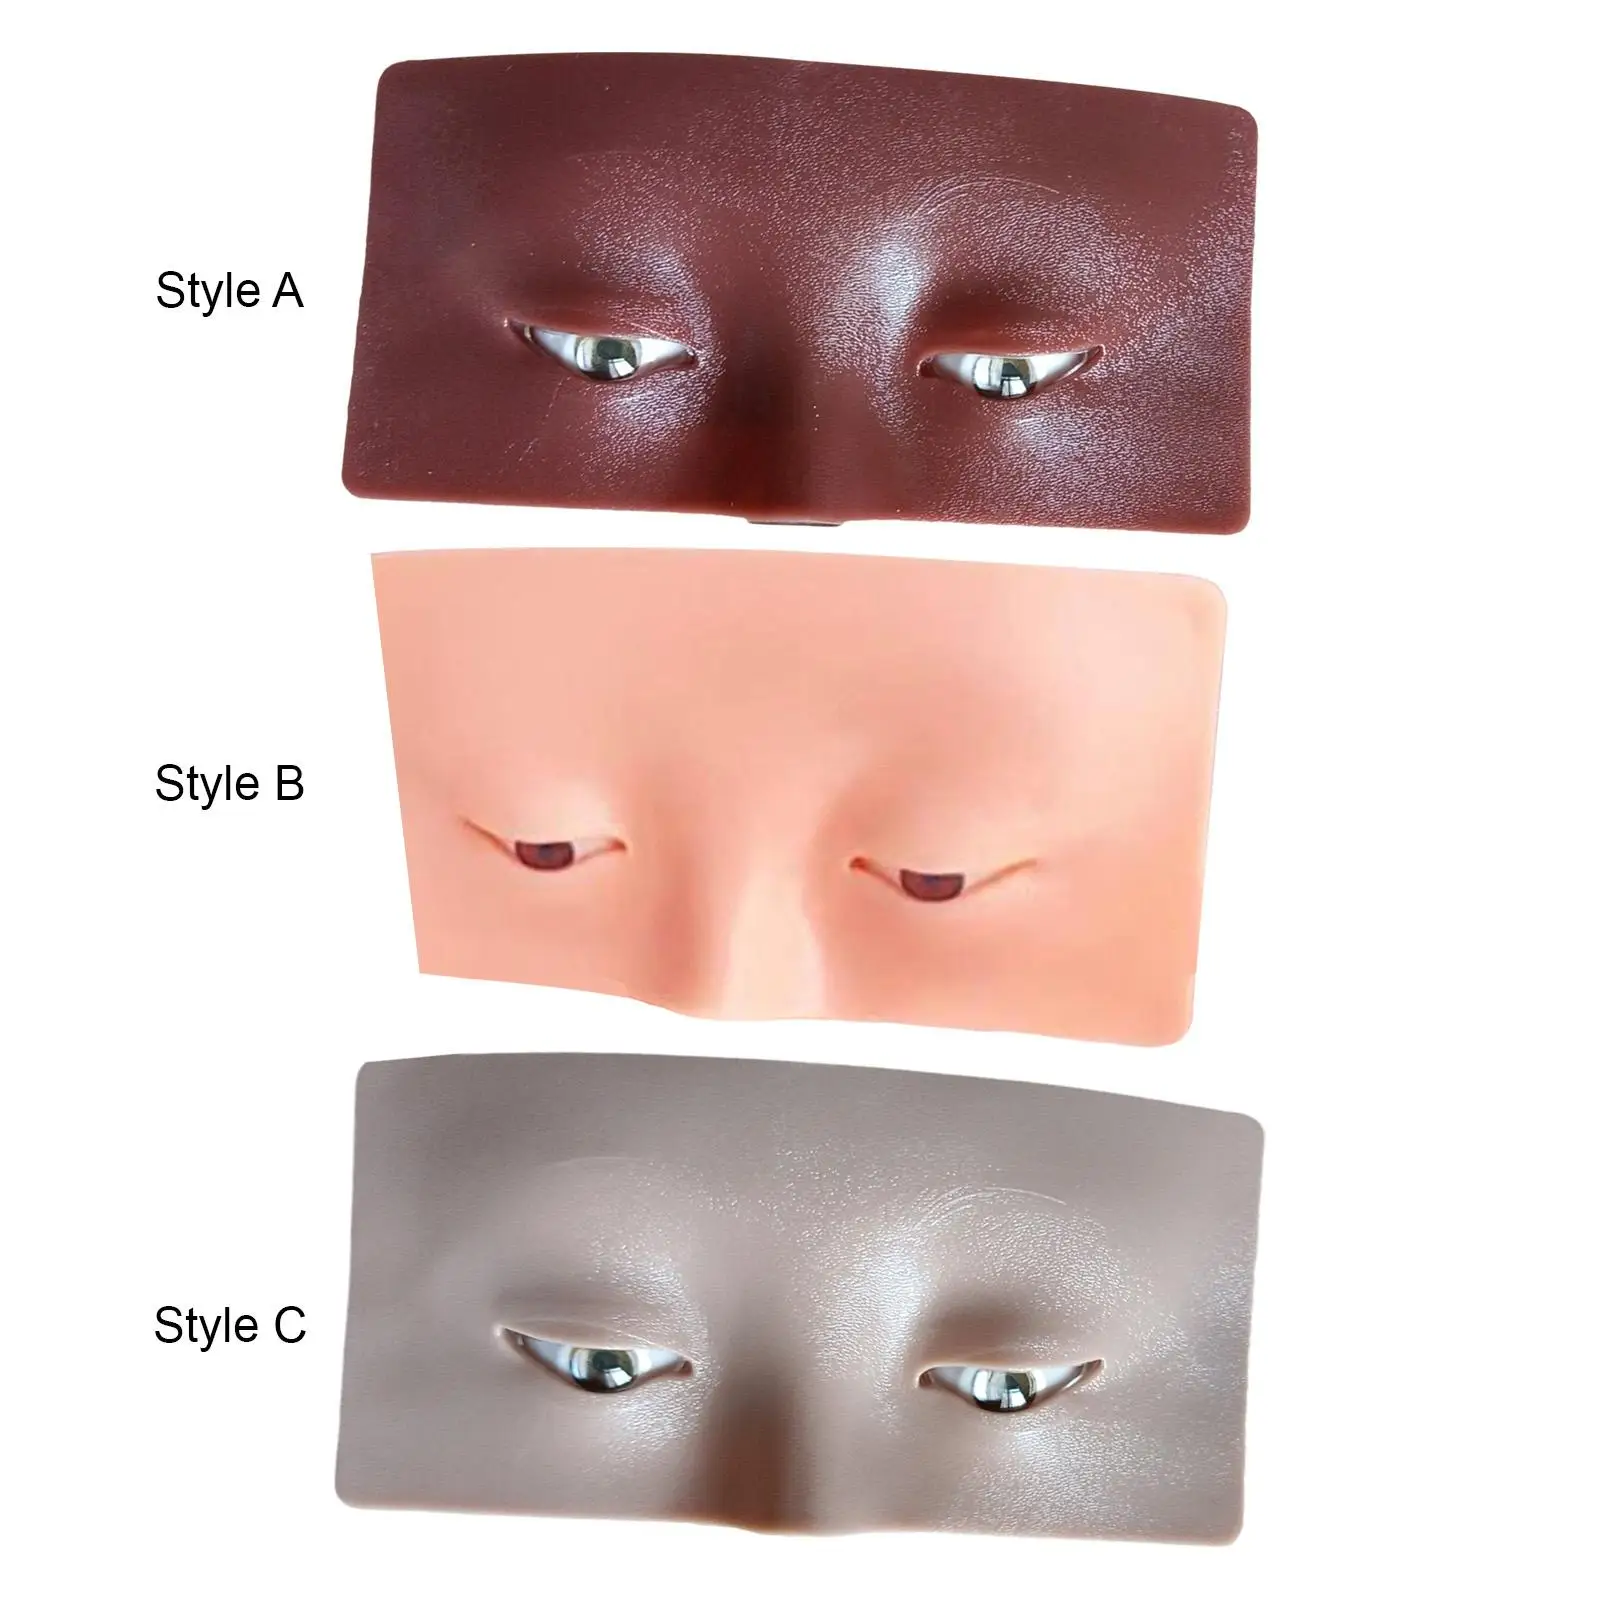 Eye Makeup Practice Face Salon Home Use Eye Makeup Face Practice Board The Perfect Aid to Practicing Makeup for Makeup Artists